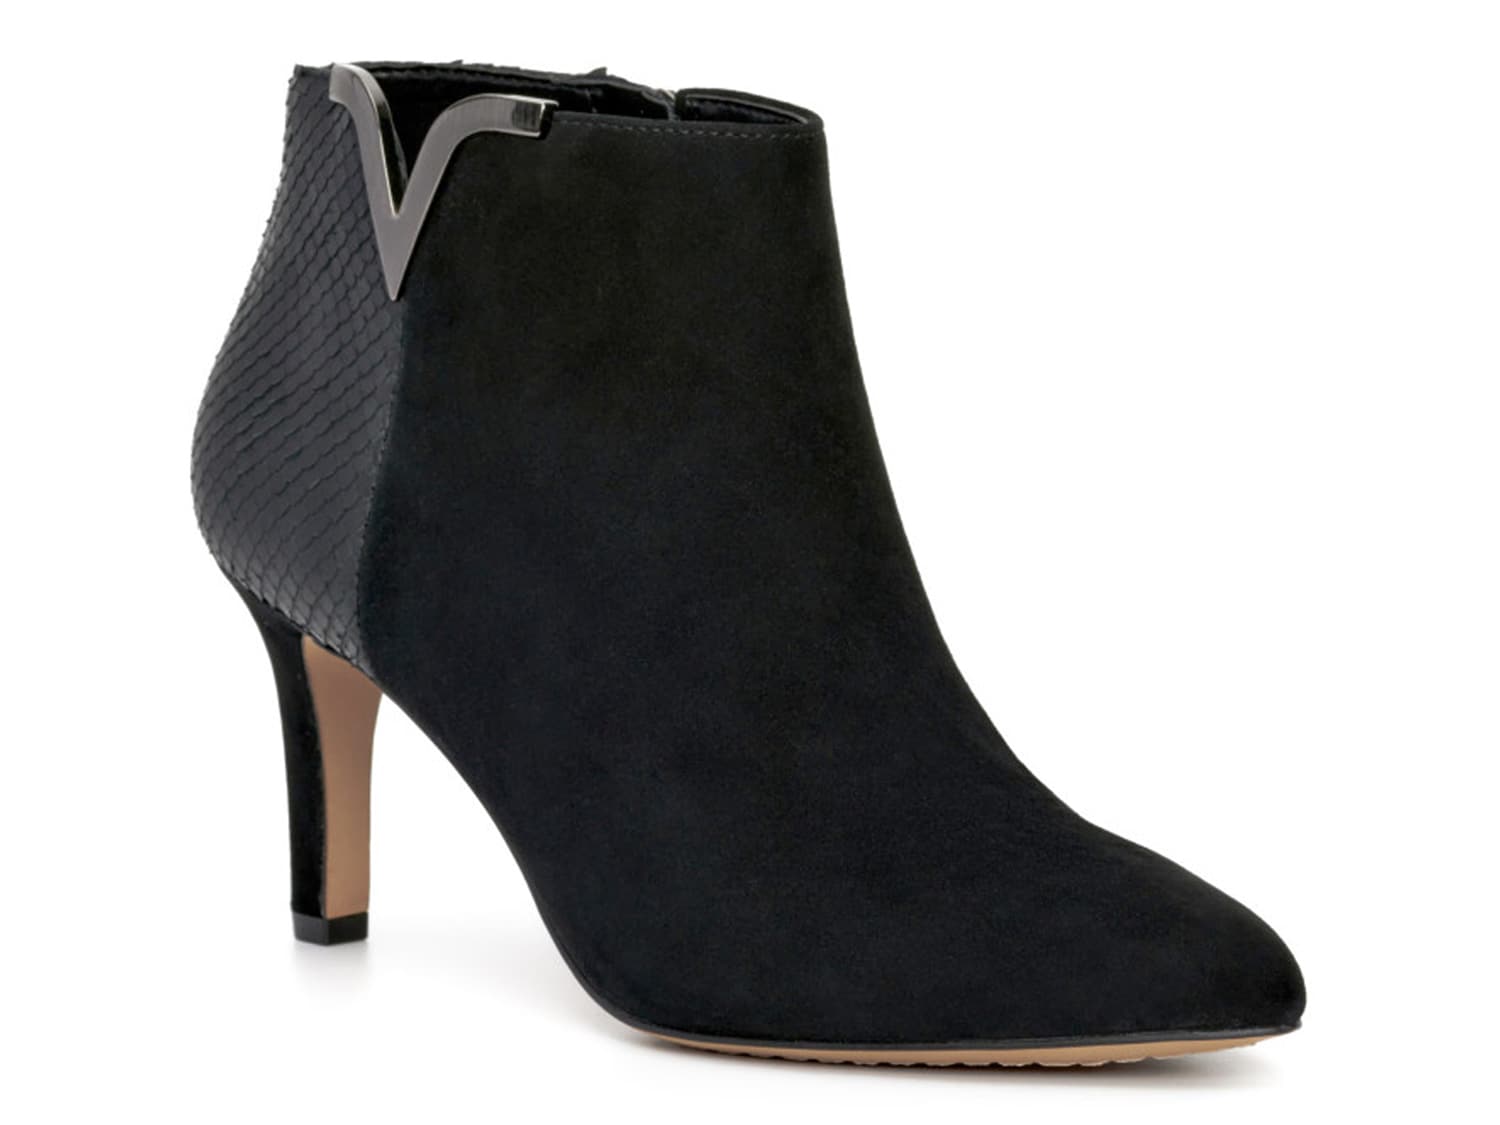 Vince Camuto Iylena Bootie - Free Shipping | DSW